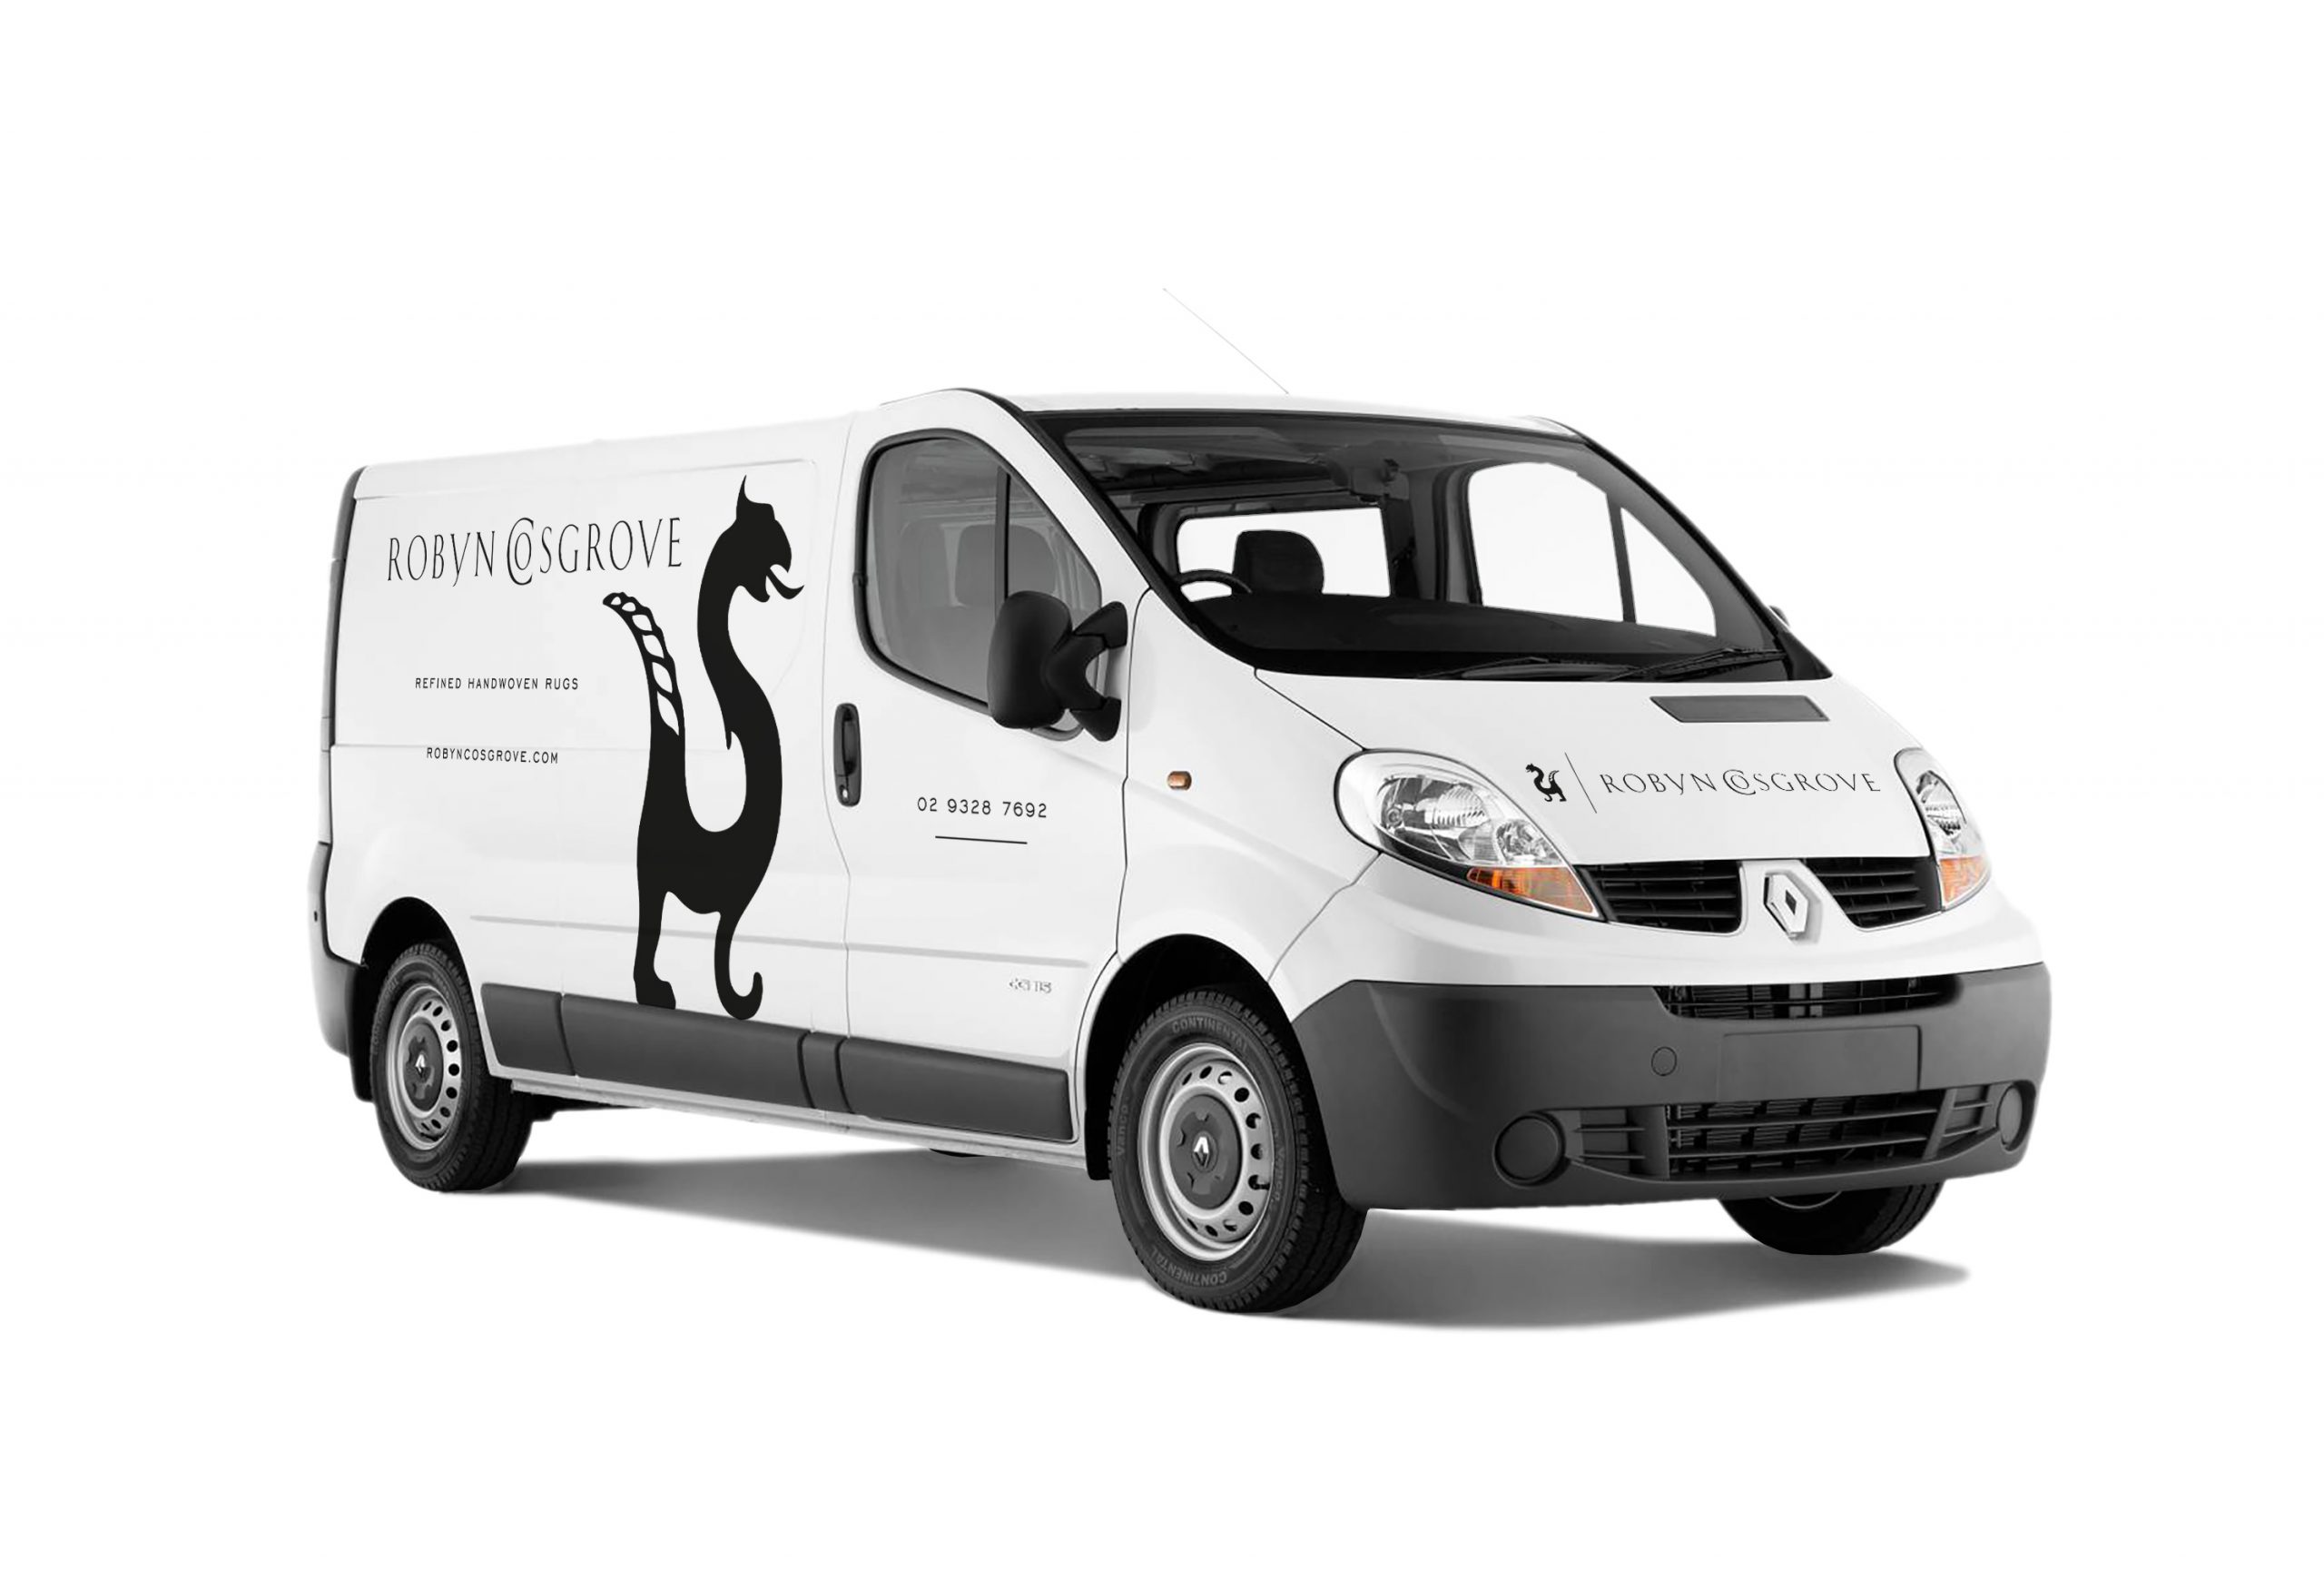 Robyn Cosgrove Rugs Refined Handwoven Designer Rugs Van livery